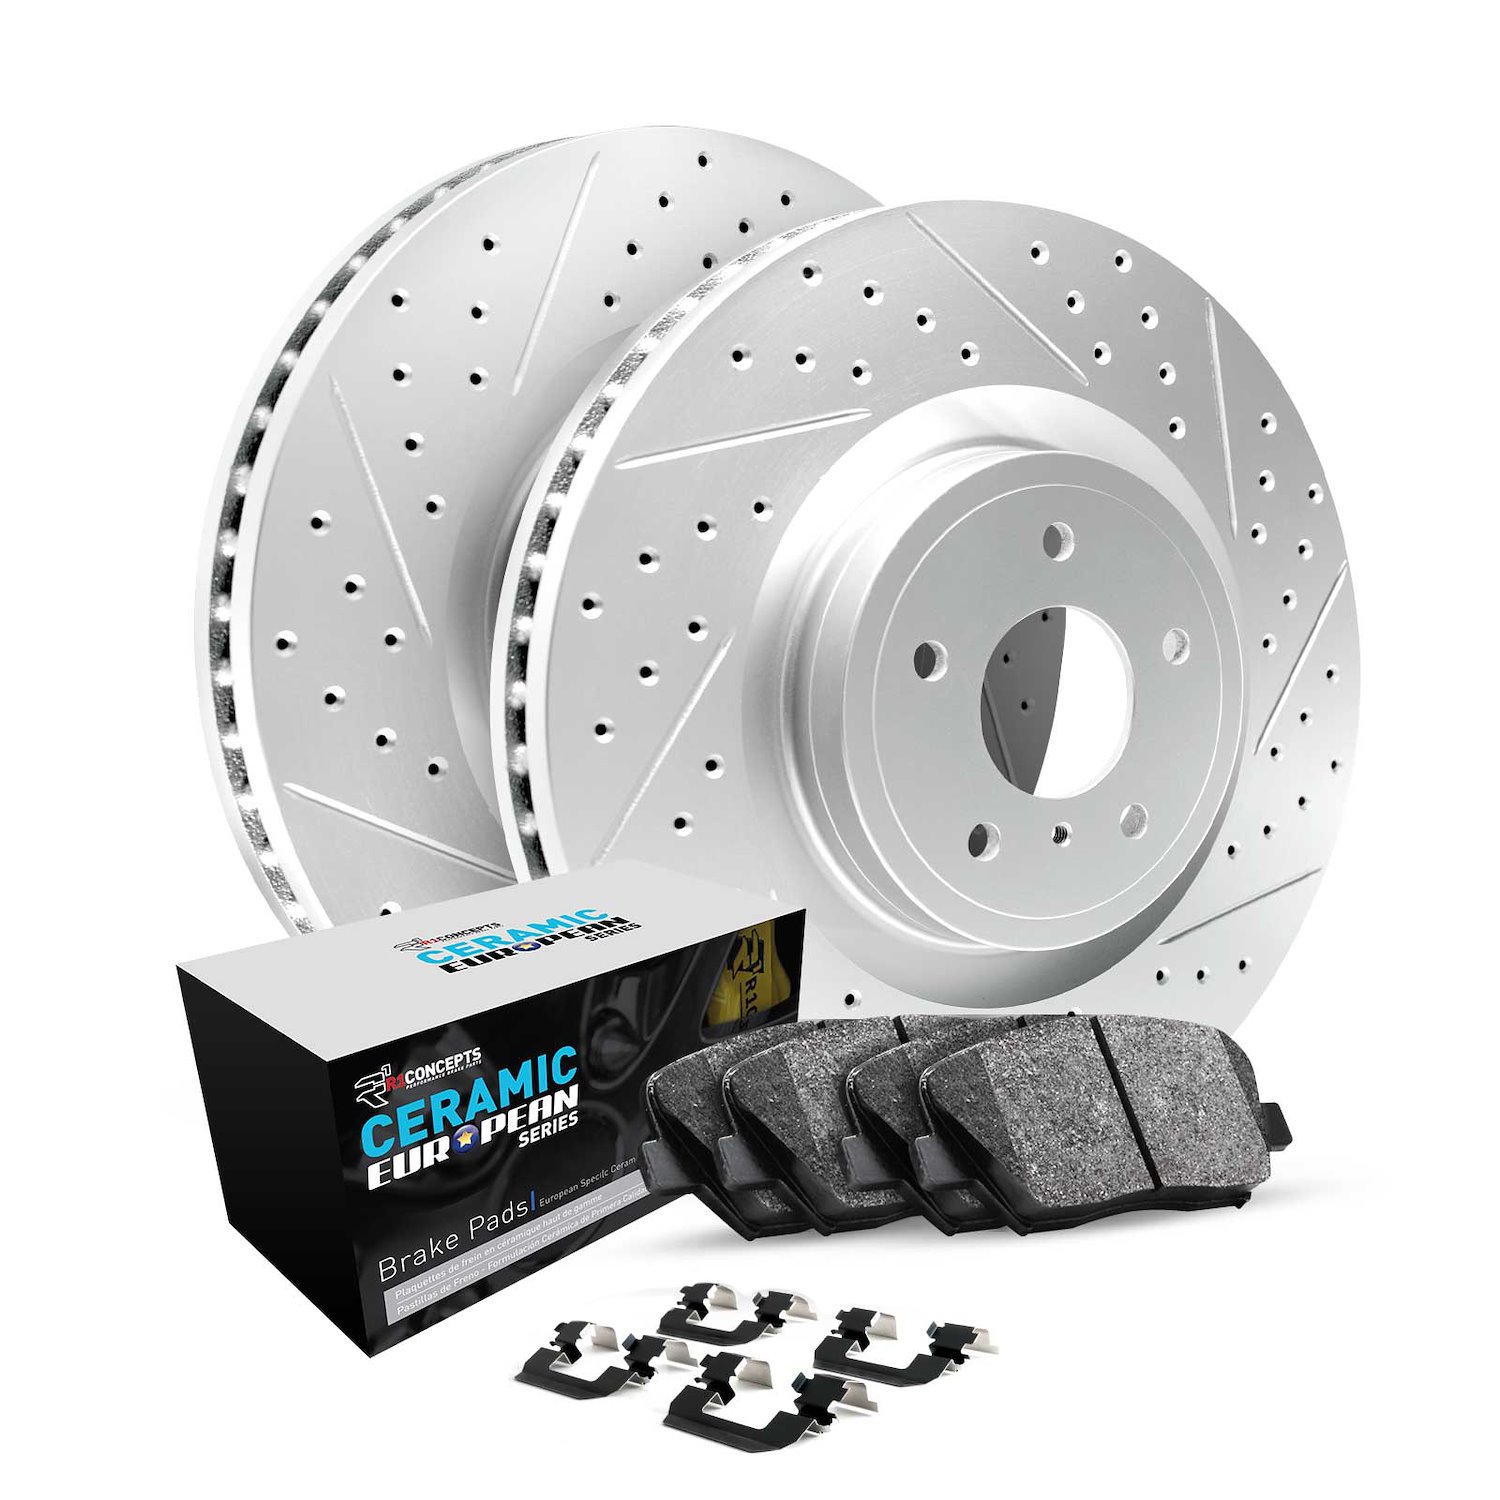 GEO-Carbon Drilled/Slotted Rotors w/Euro Ceramic Pads/Hardware, 1996-2008 Fits Multiple Makes/Models, Position: Front